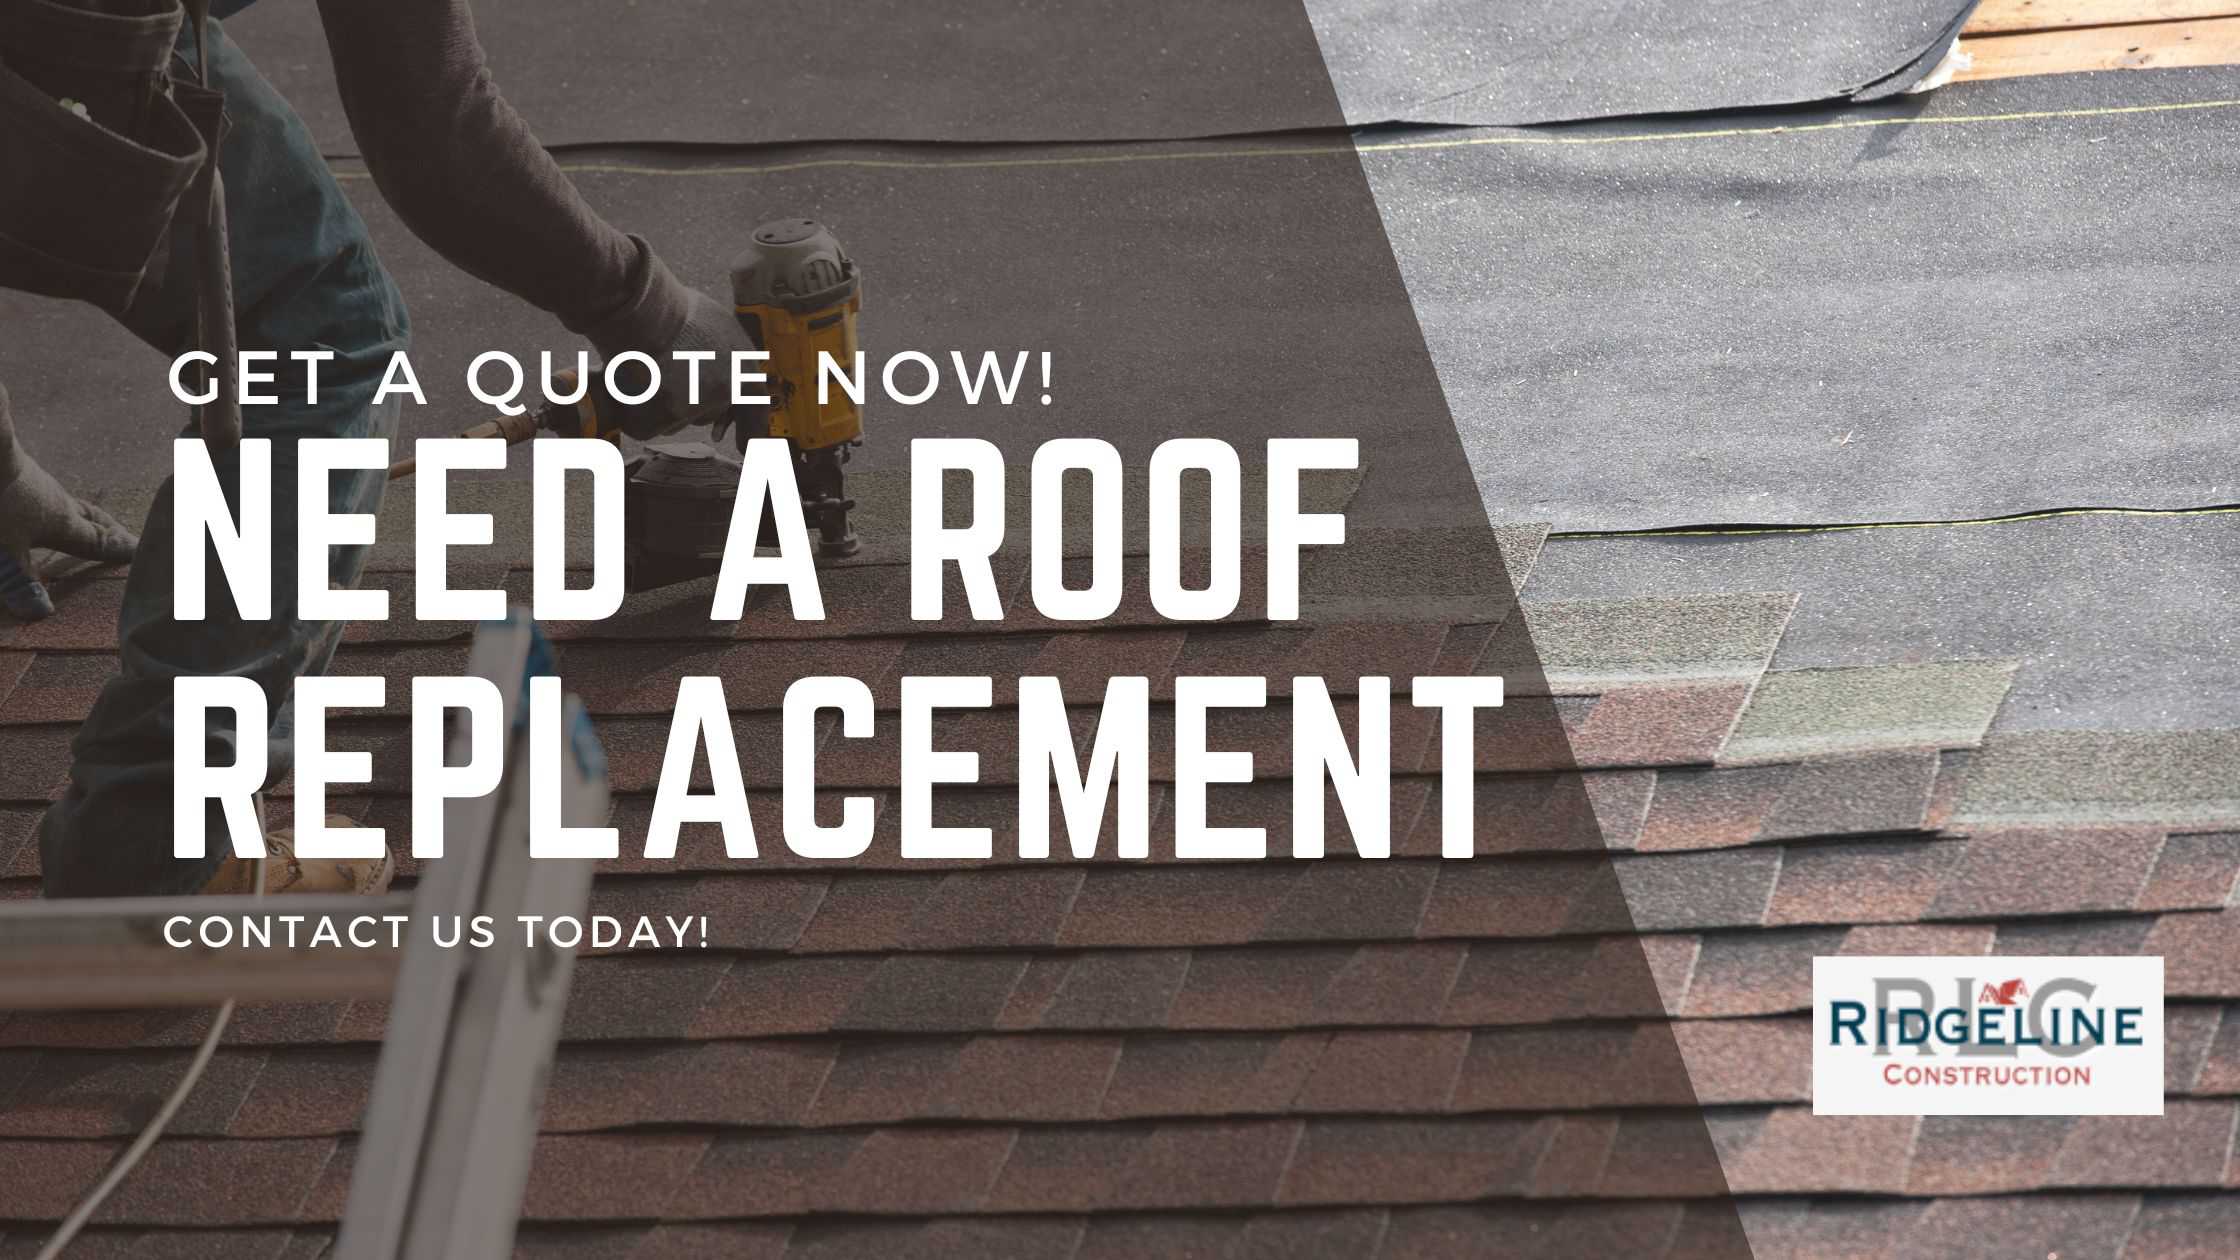 Need a roof replacement? Contact us today.